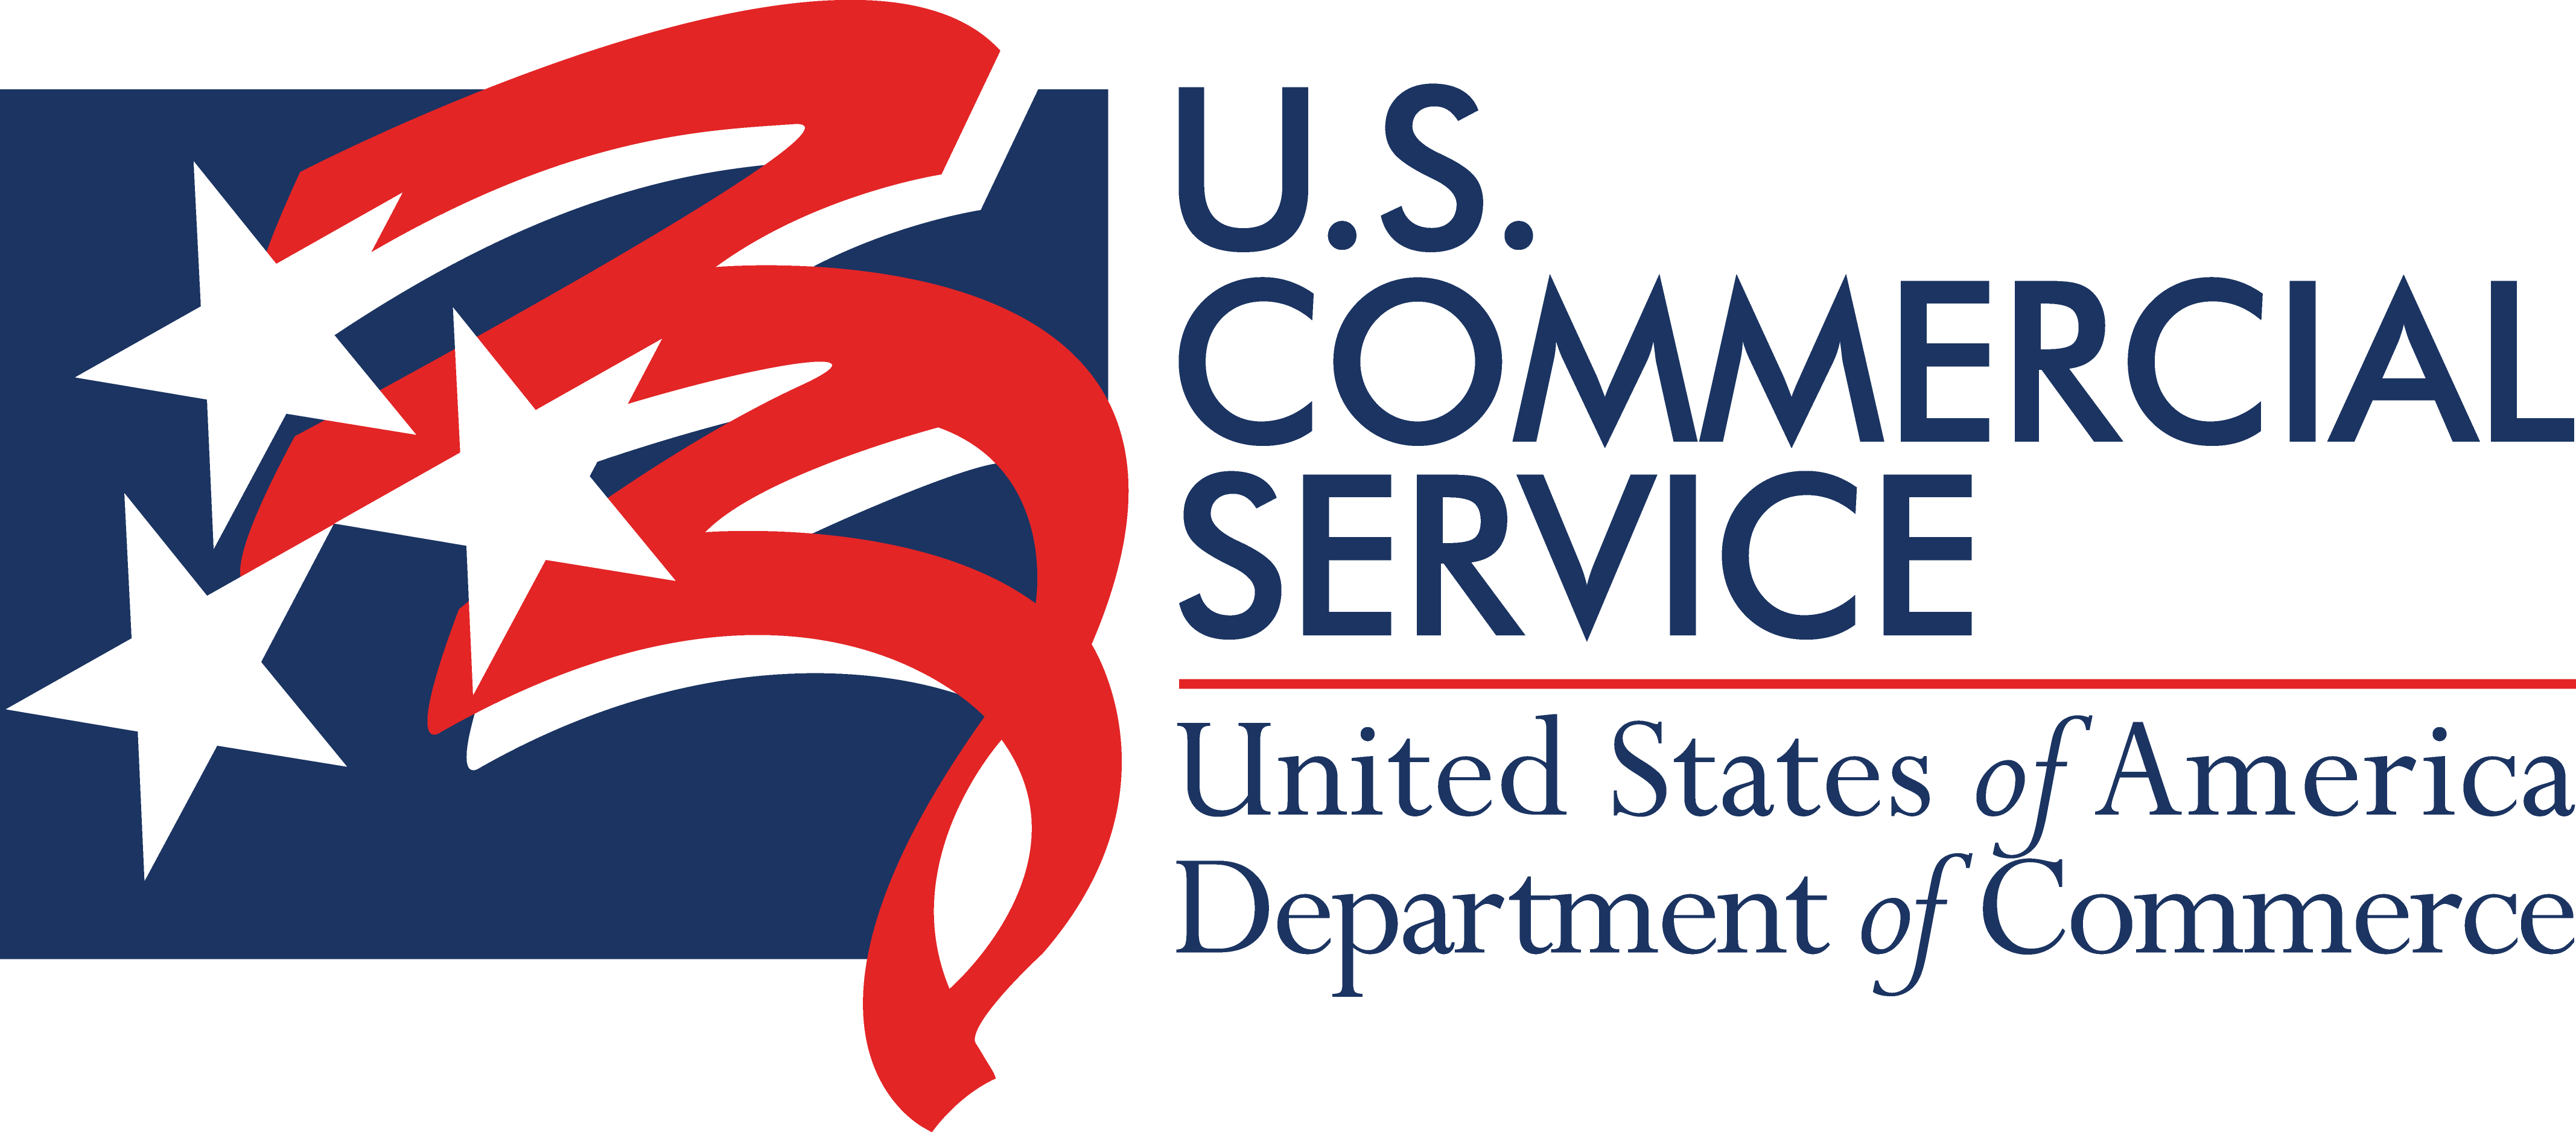 USA commercial on. The United States commercial service (USCS). U.S. commercial service Israel дщпщ. U.S. commercial service Israel logo.